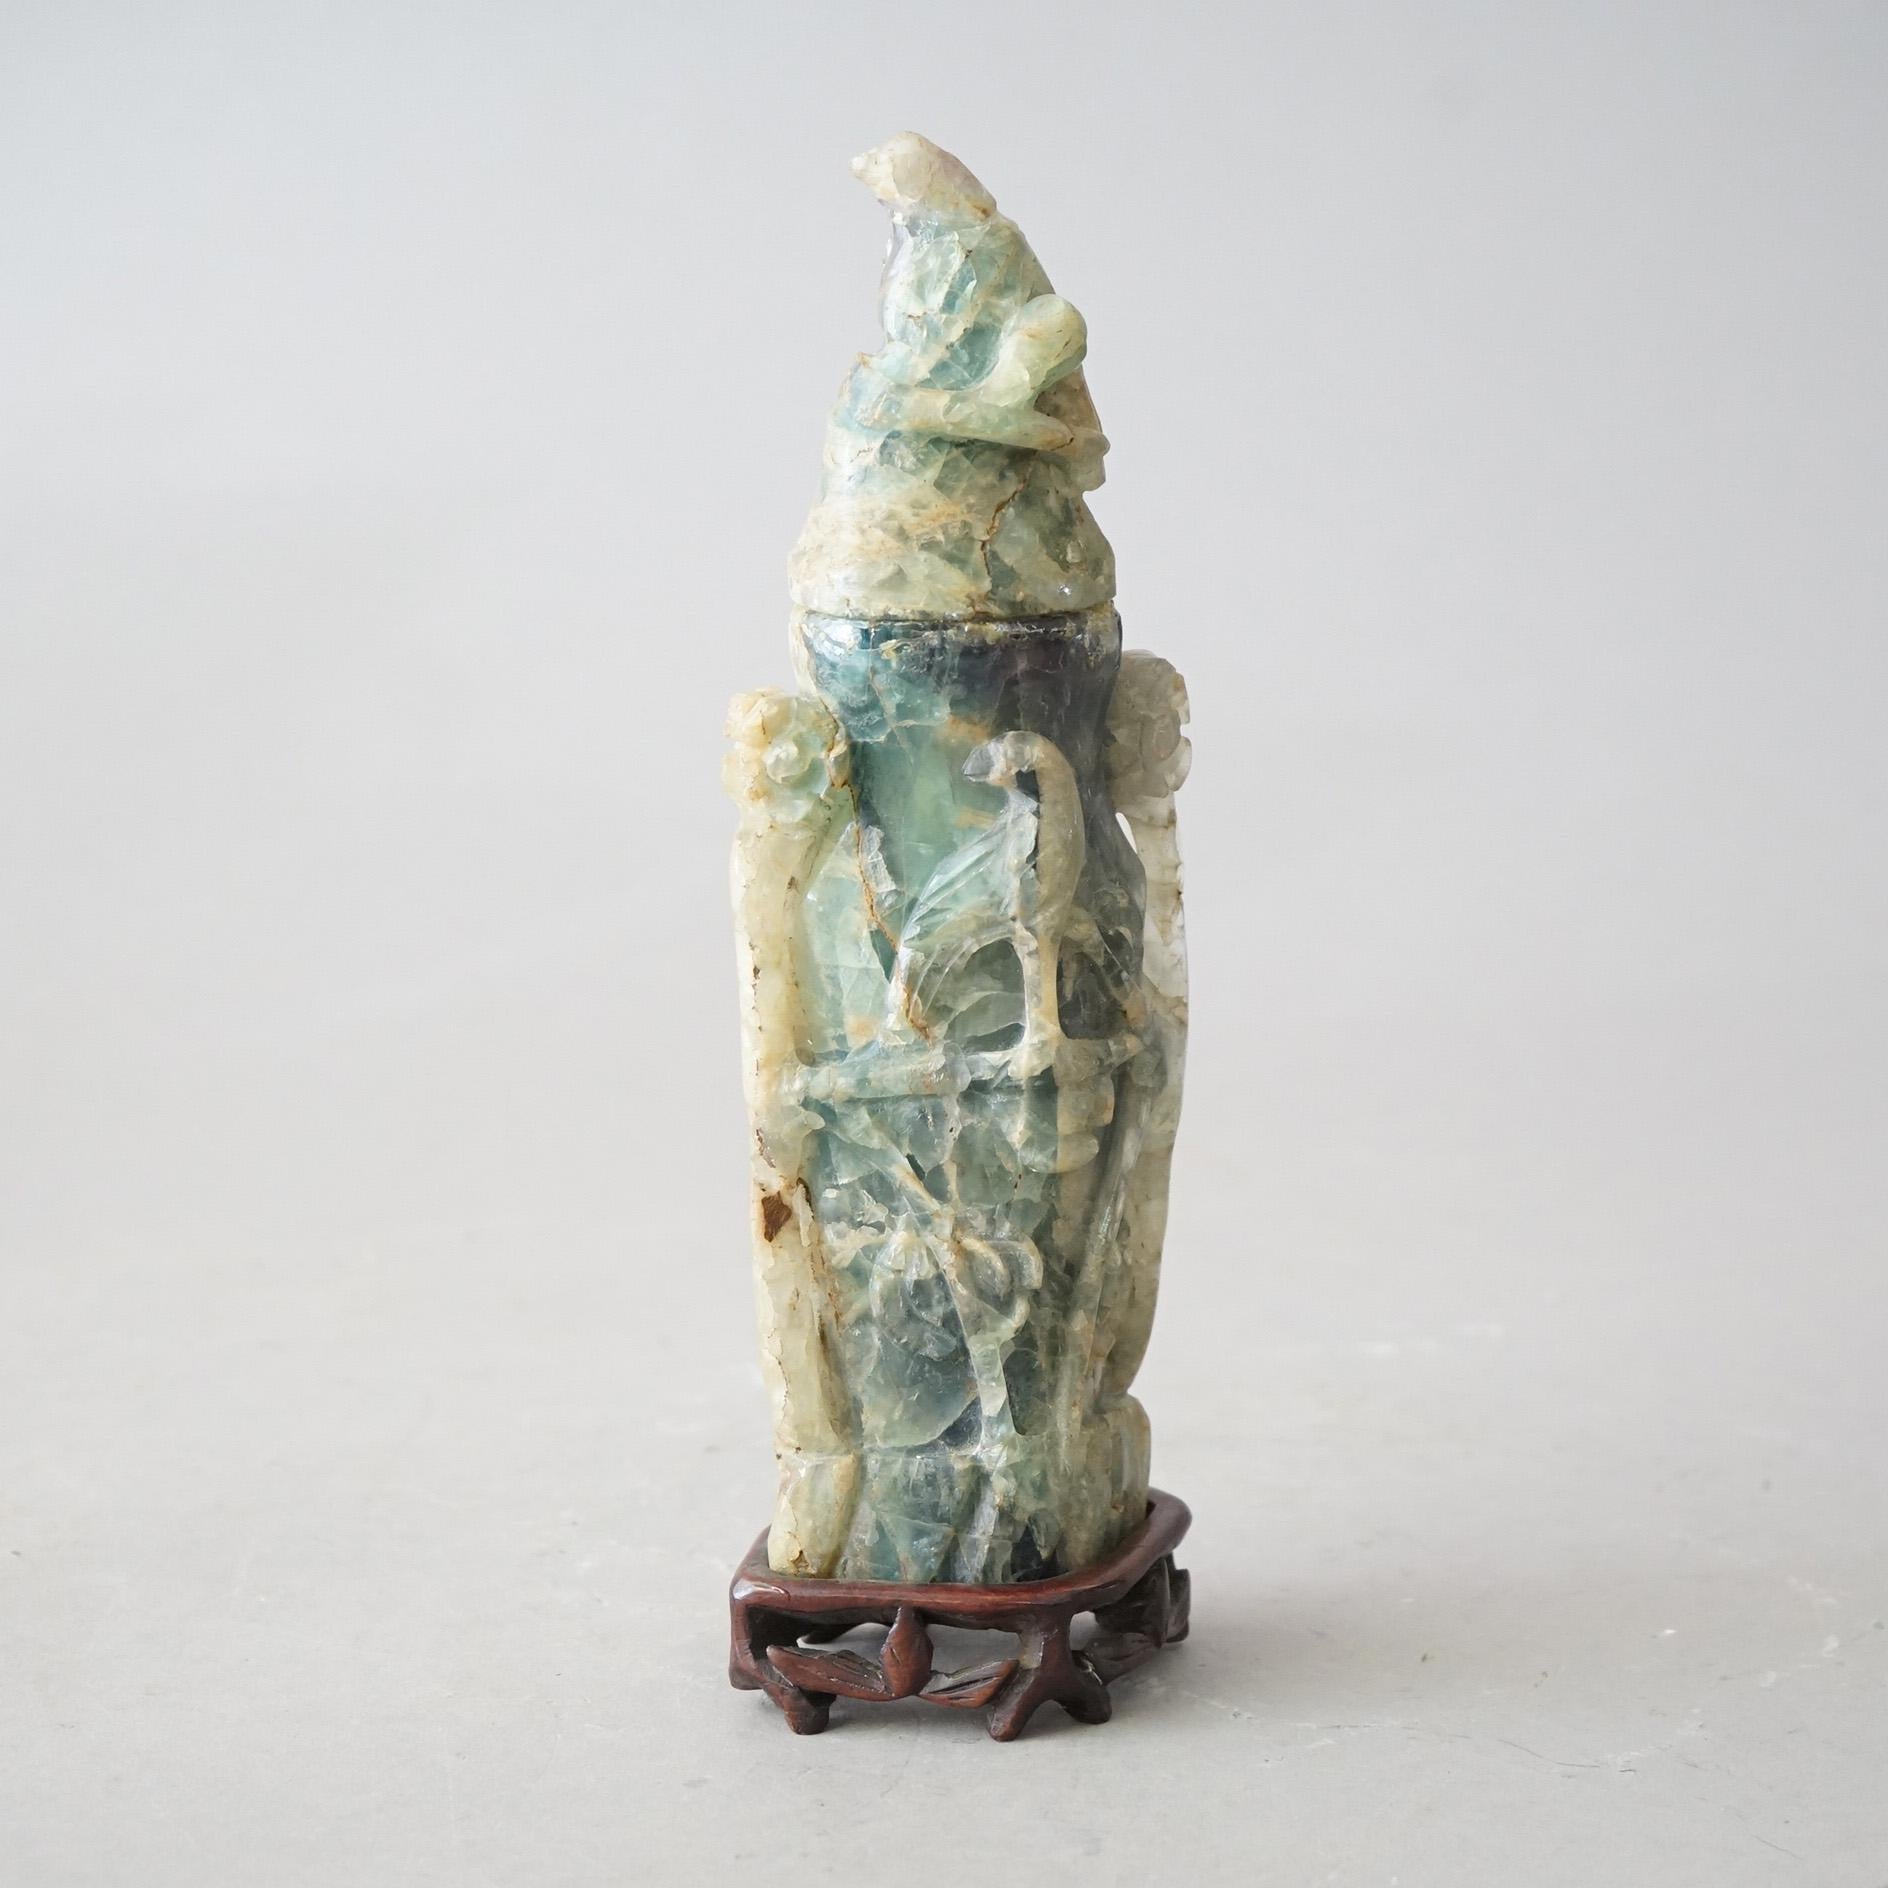 Antique Asian Carved Jade Soapstone Sculpture with Birds C1890 For Sale 2